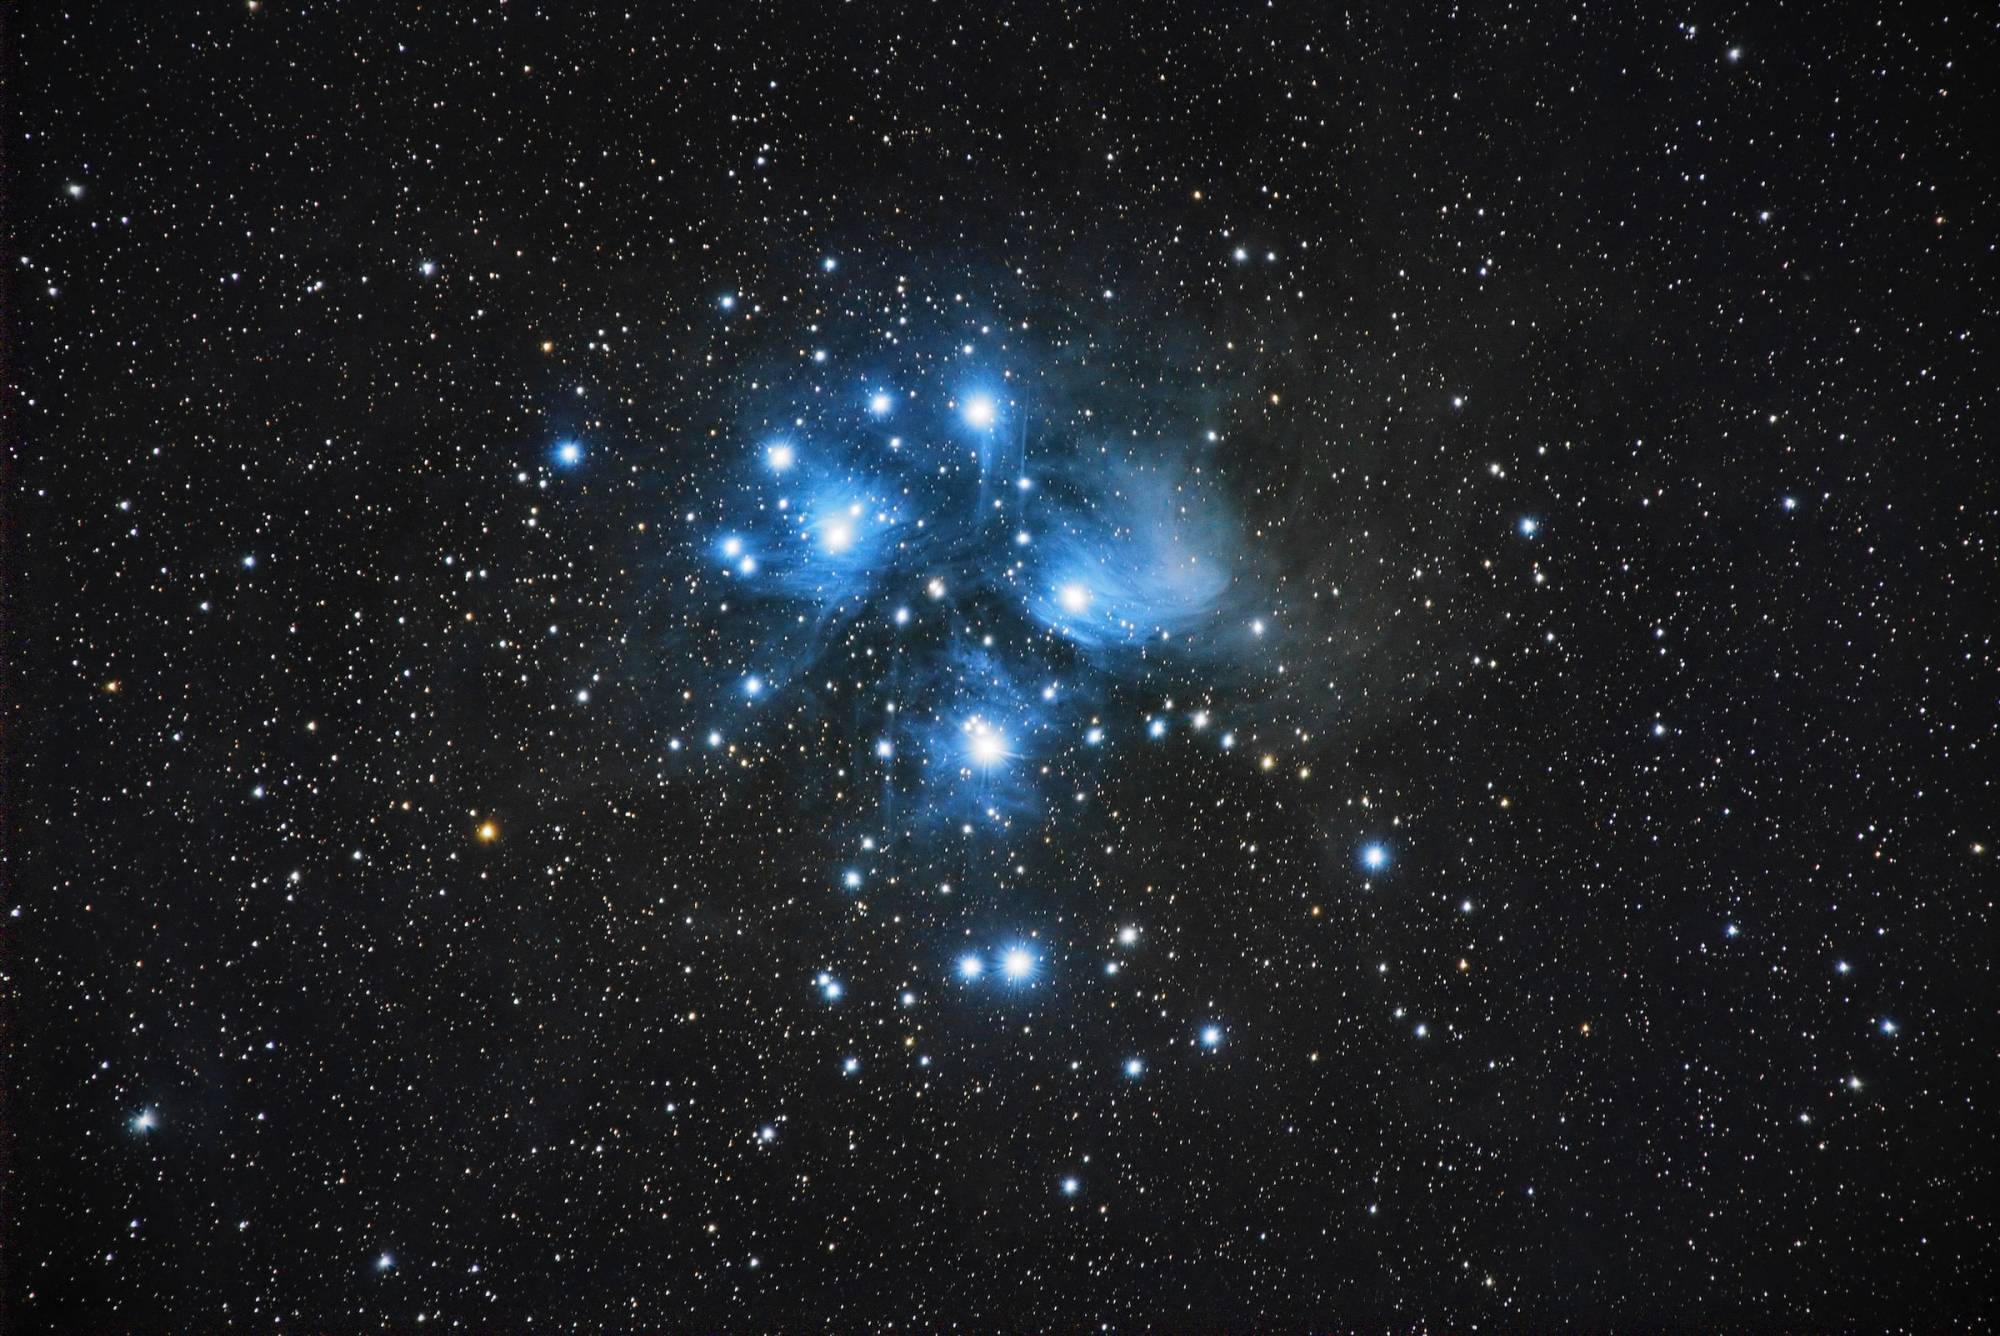 A blue cluster of stars in a night sky